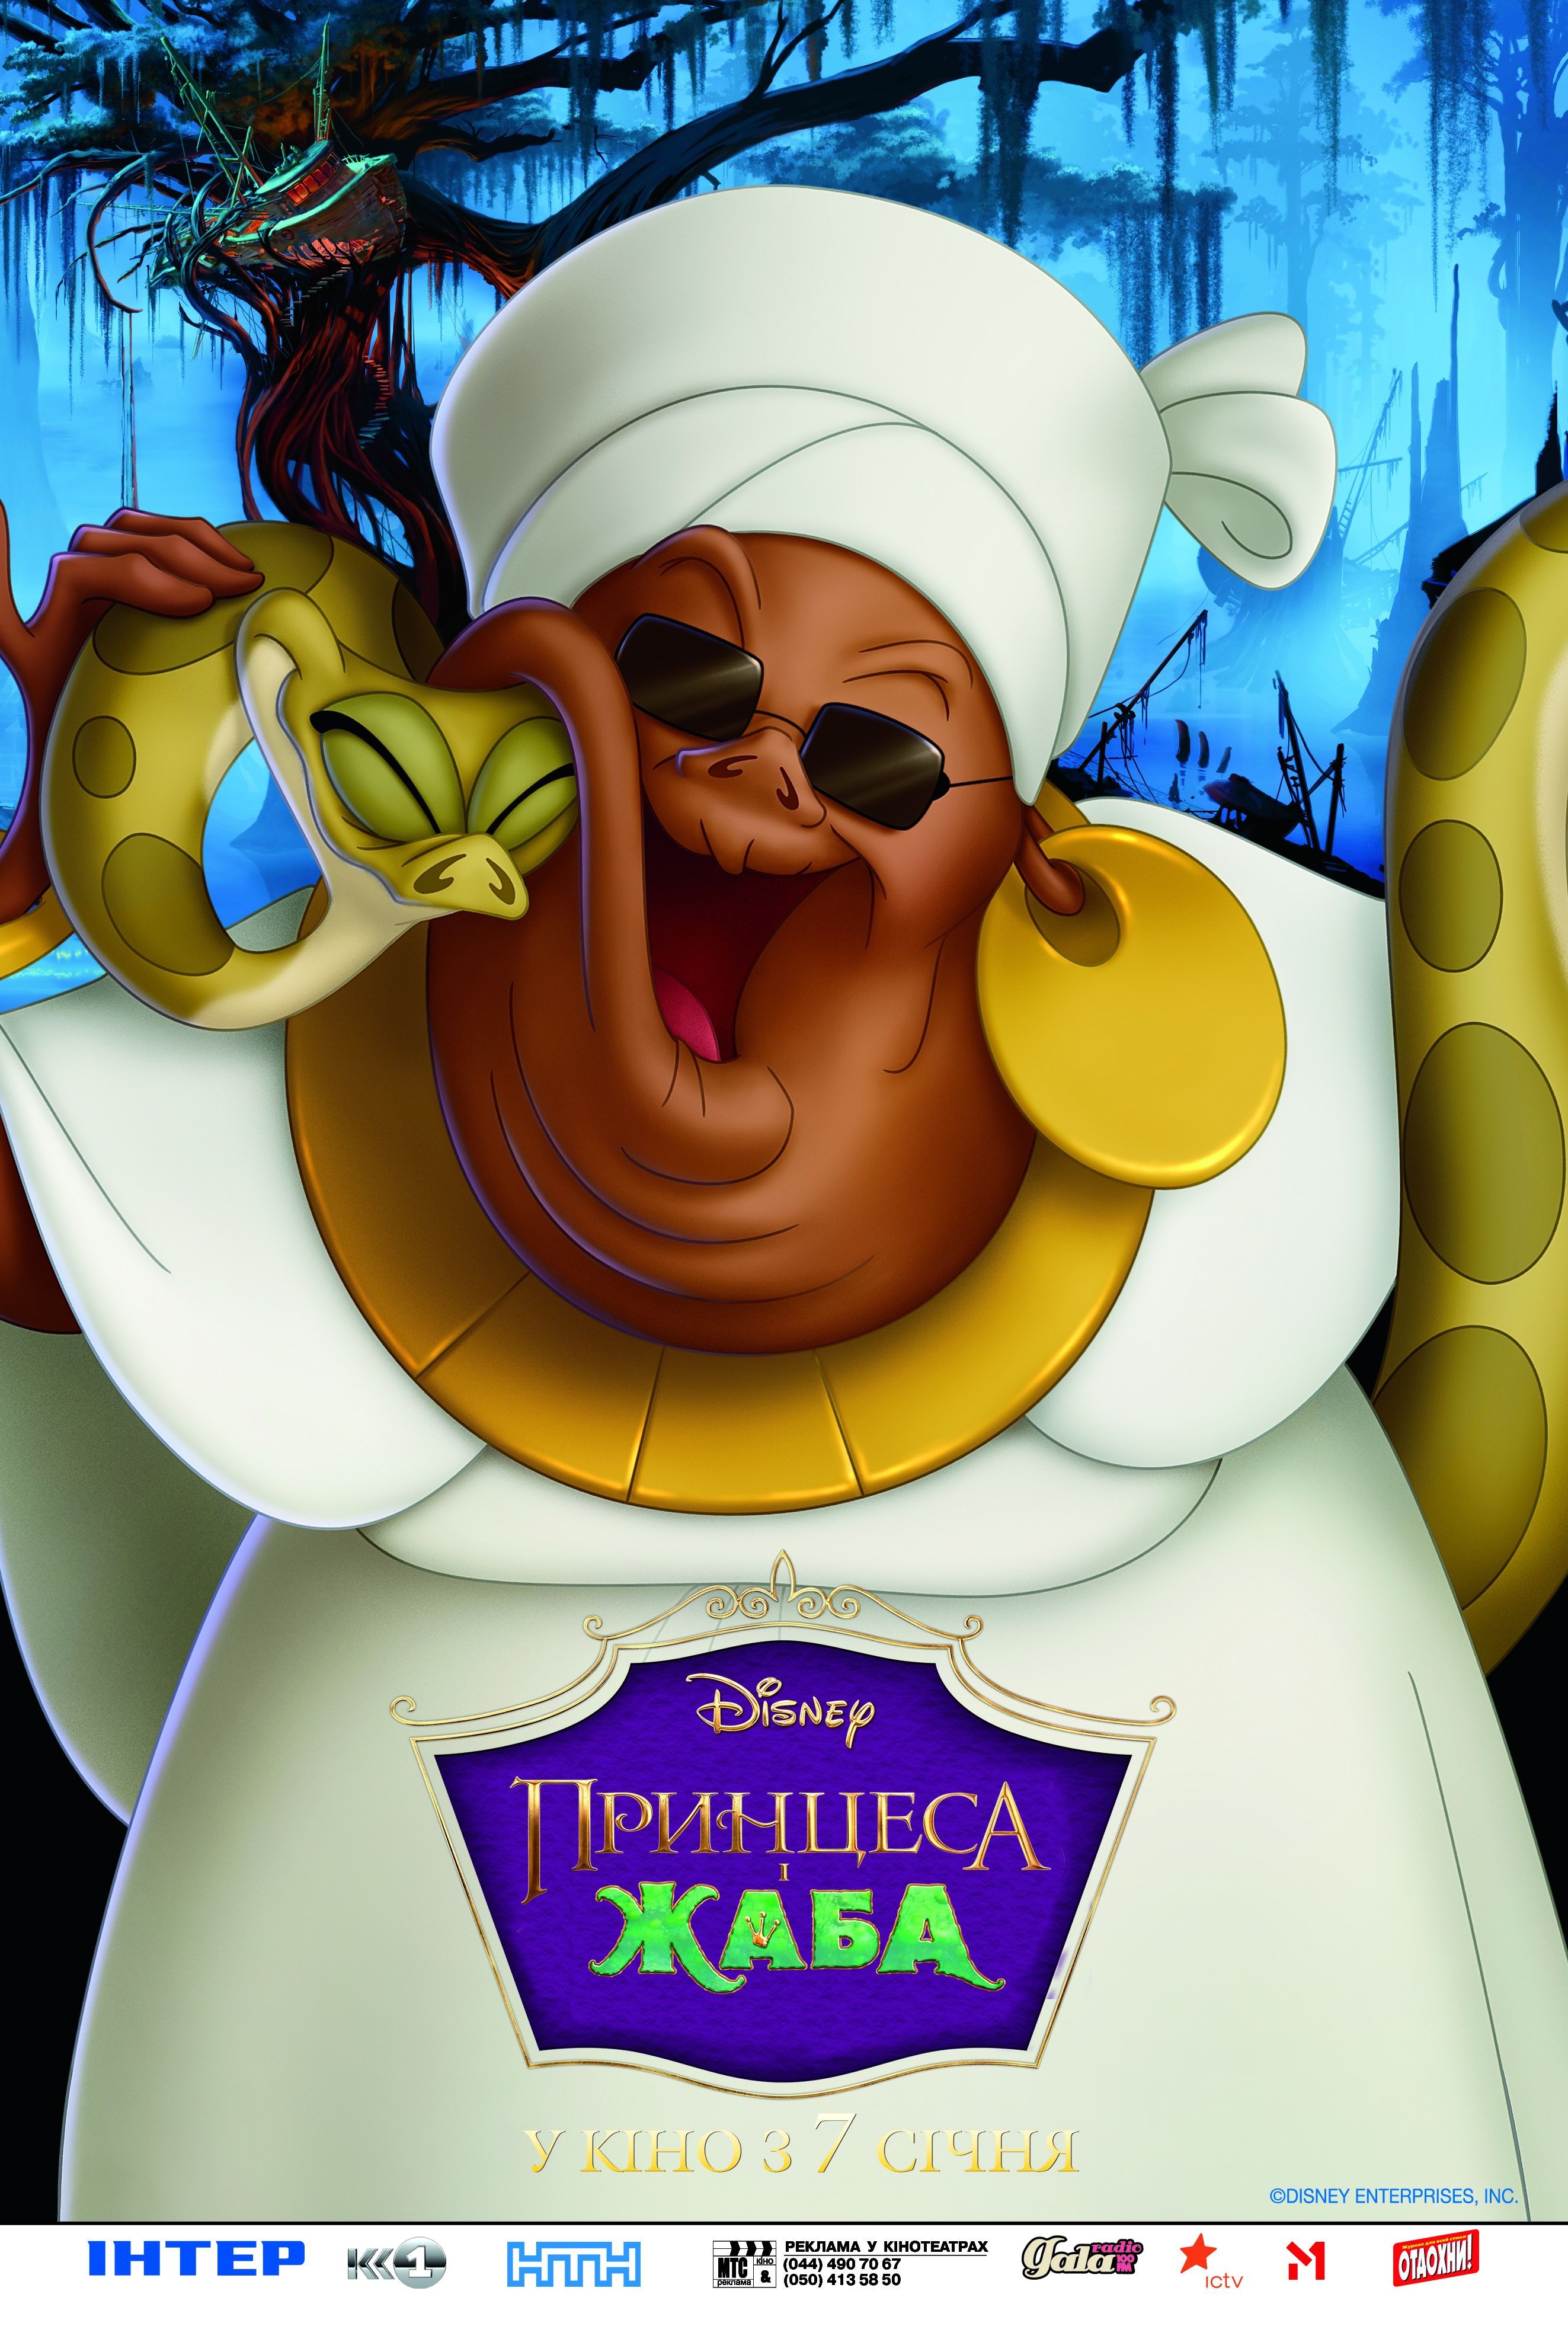 Princess and the Frog, The (2009) poster.